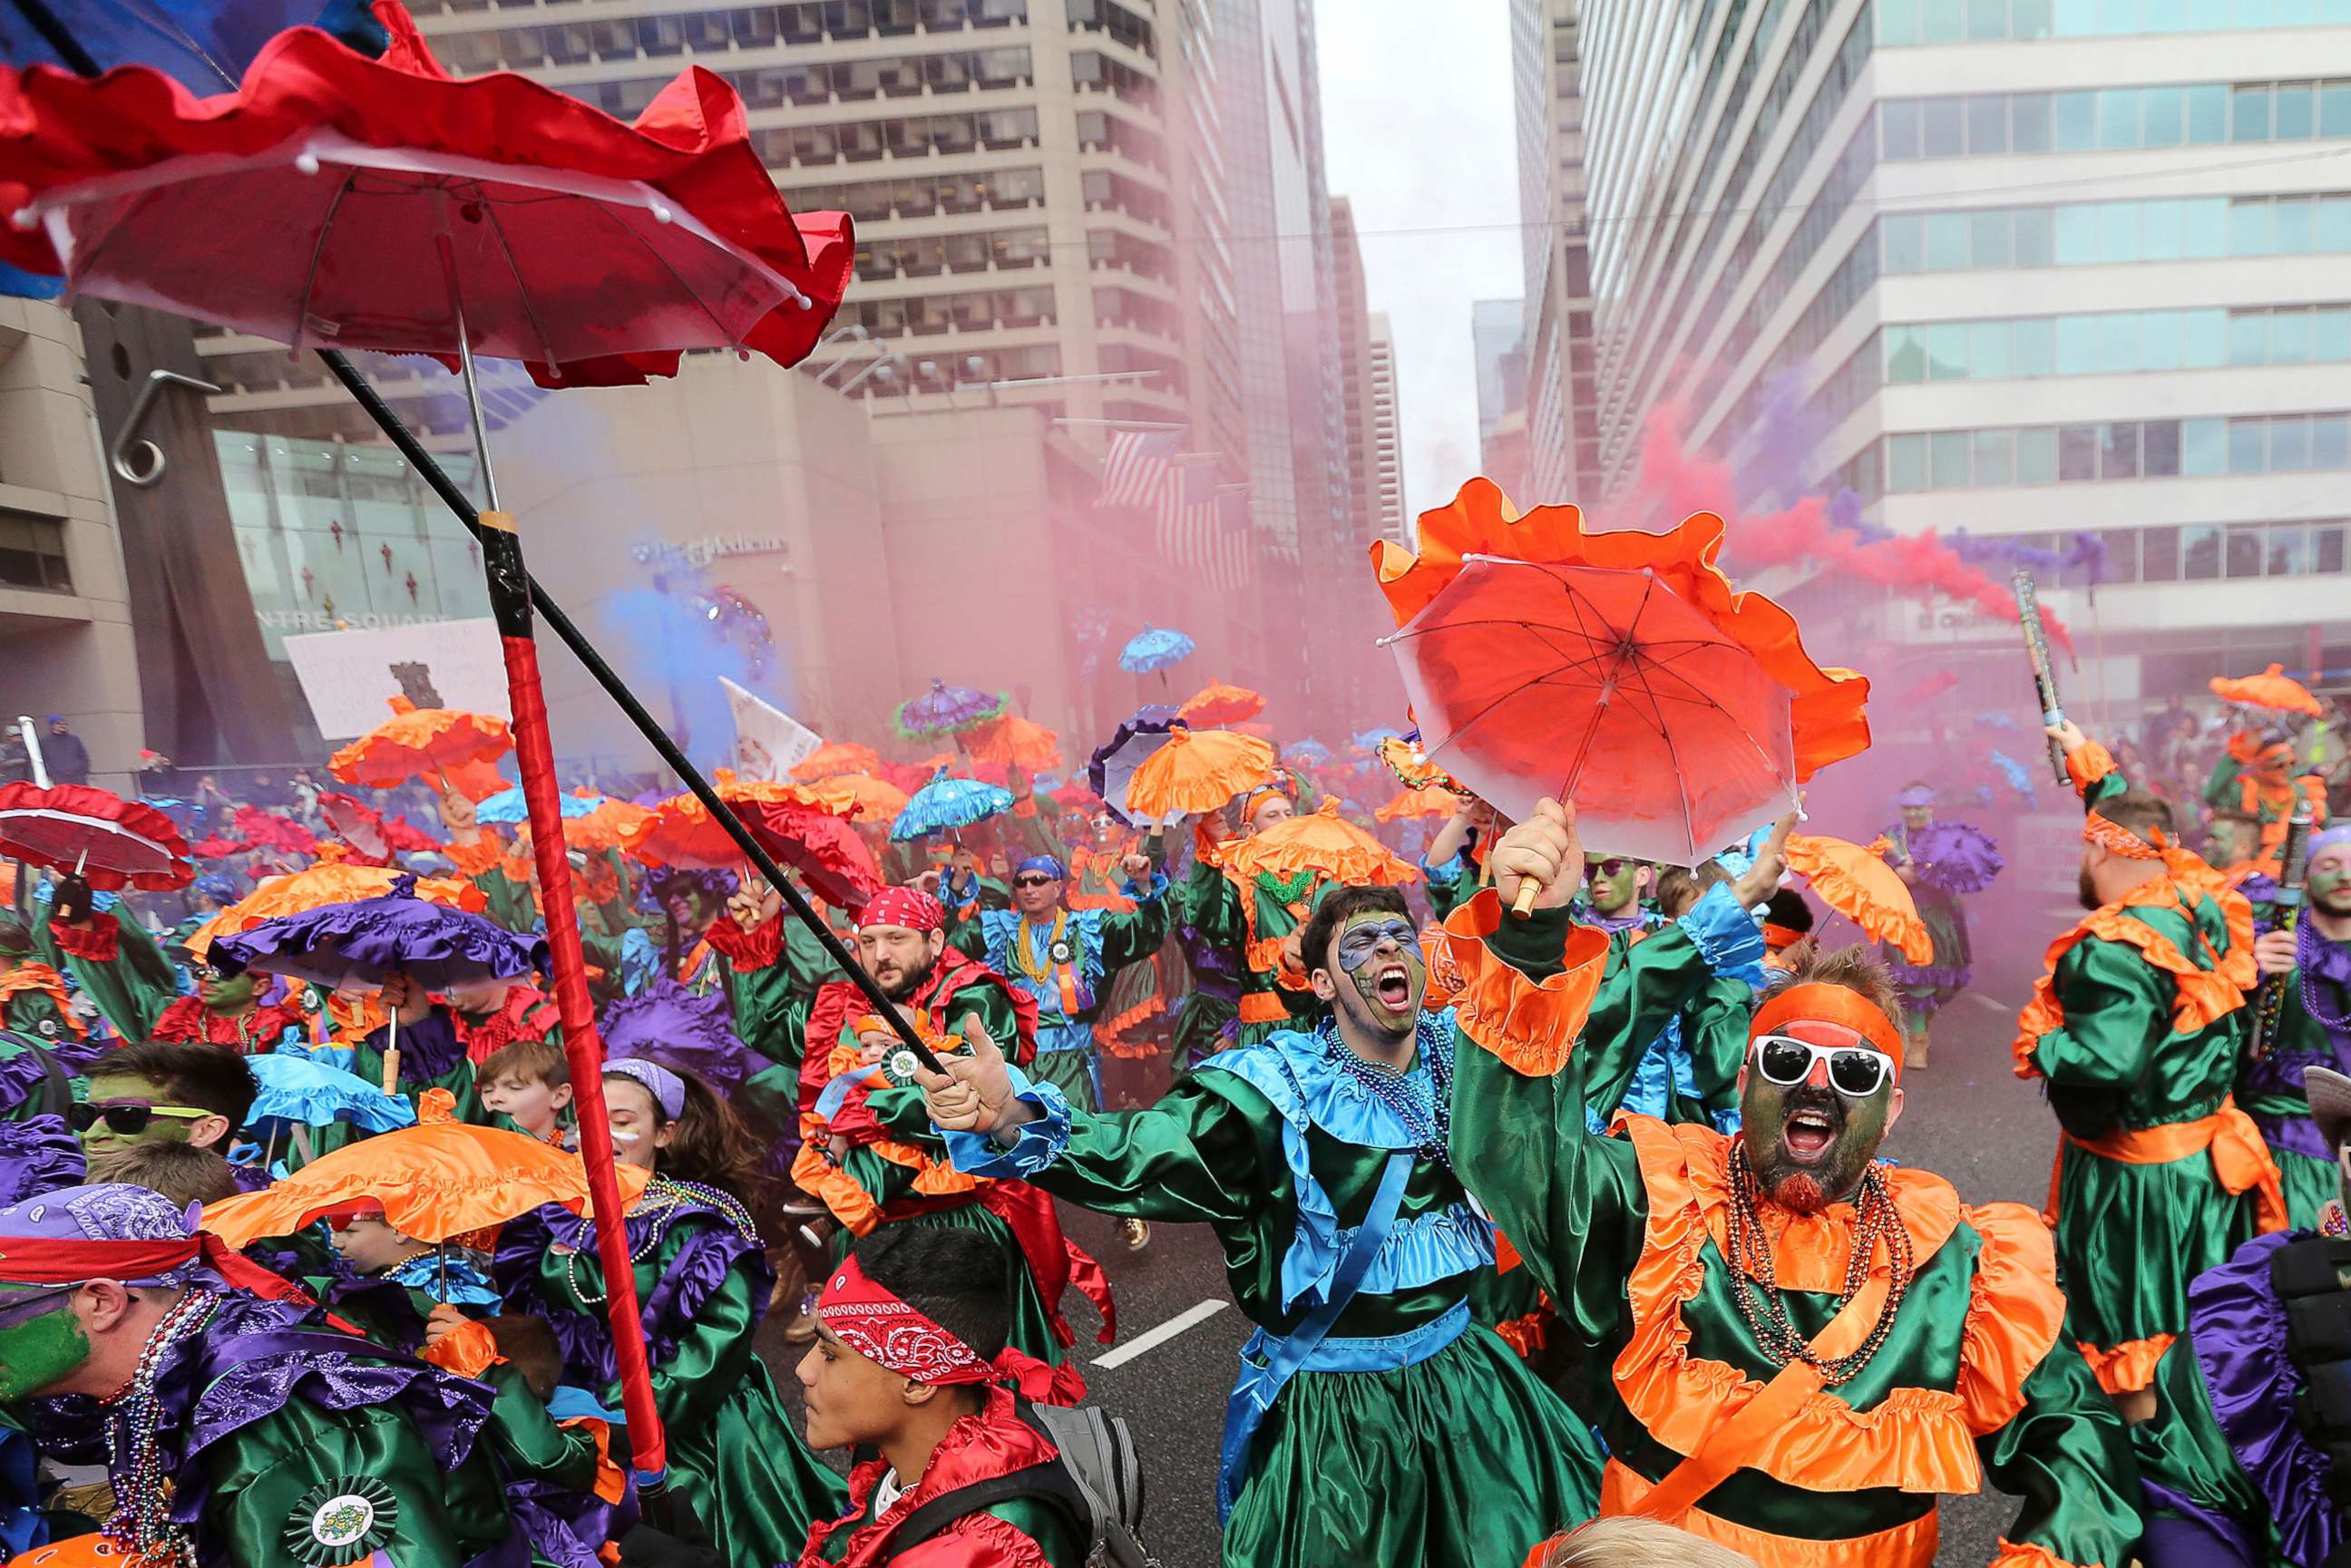 PHOTO: Members of the Saints Wench Brigade strut in front of the judges at City Hall during the Mummers Parade, Jan. 1, 2019, in Philadelphia.